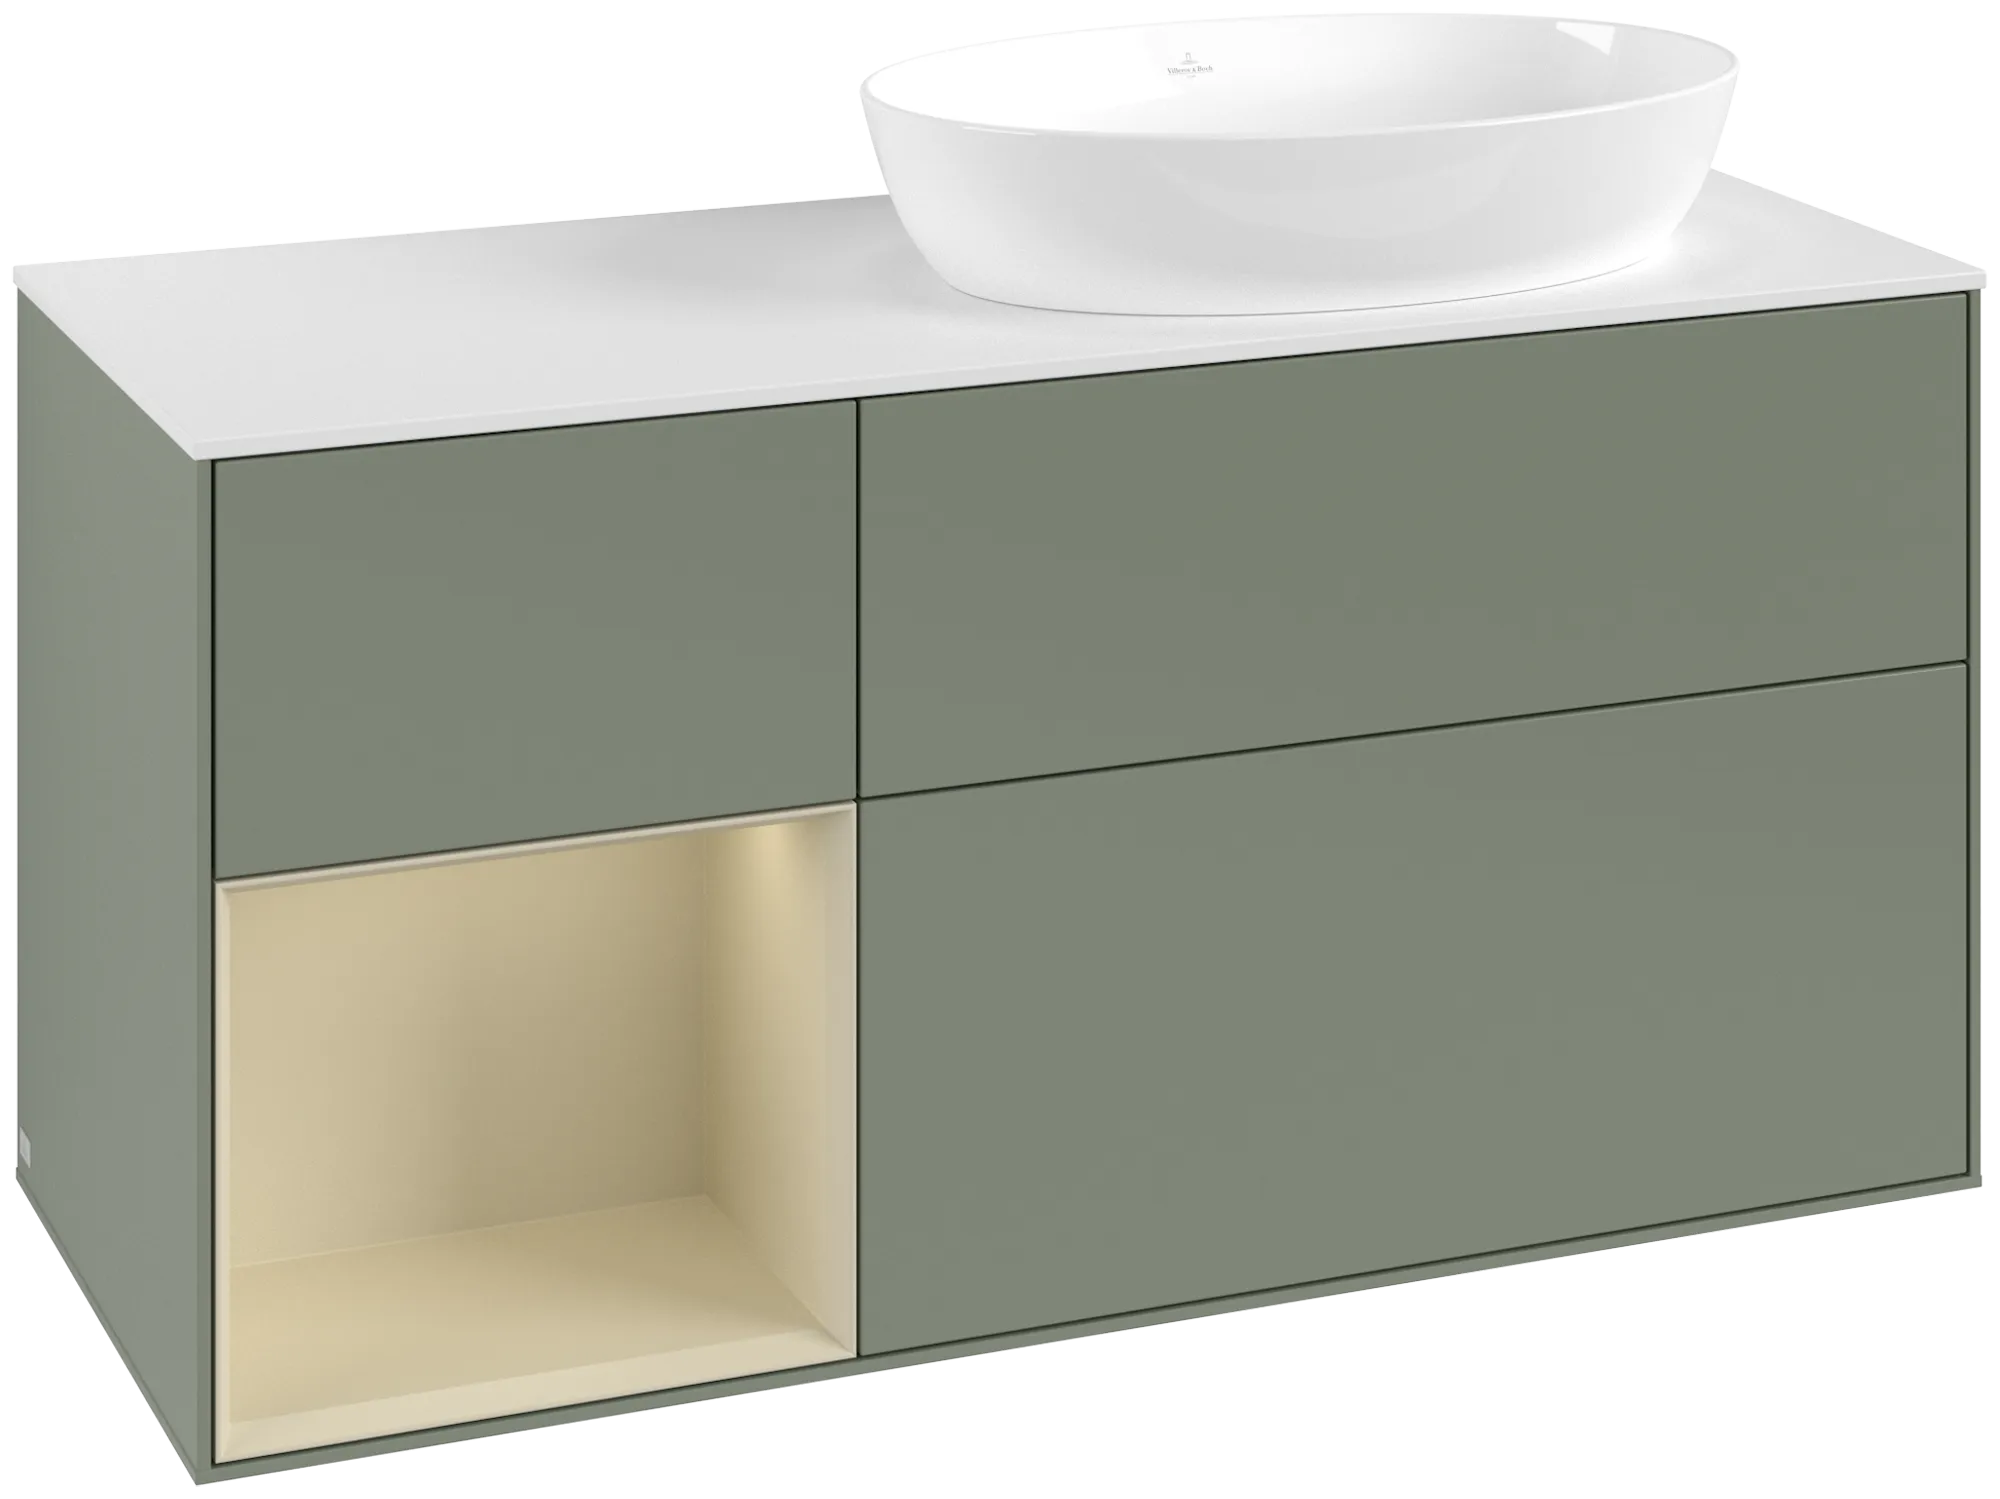 Picture of VILLEROY BOCH Finion Vanity unit, with lighting, 3 pull-out compartments, 1200 x 603 x 501 mm, Olive Matt Lacquer / Silk Grey Matt Lacquer / Glass White Matt #GA41HJGM